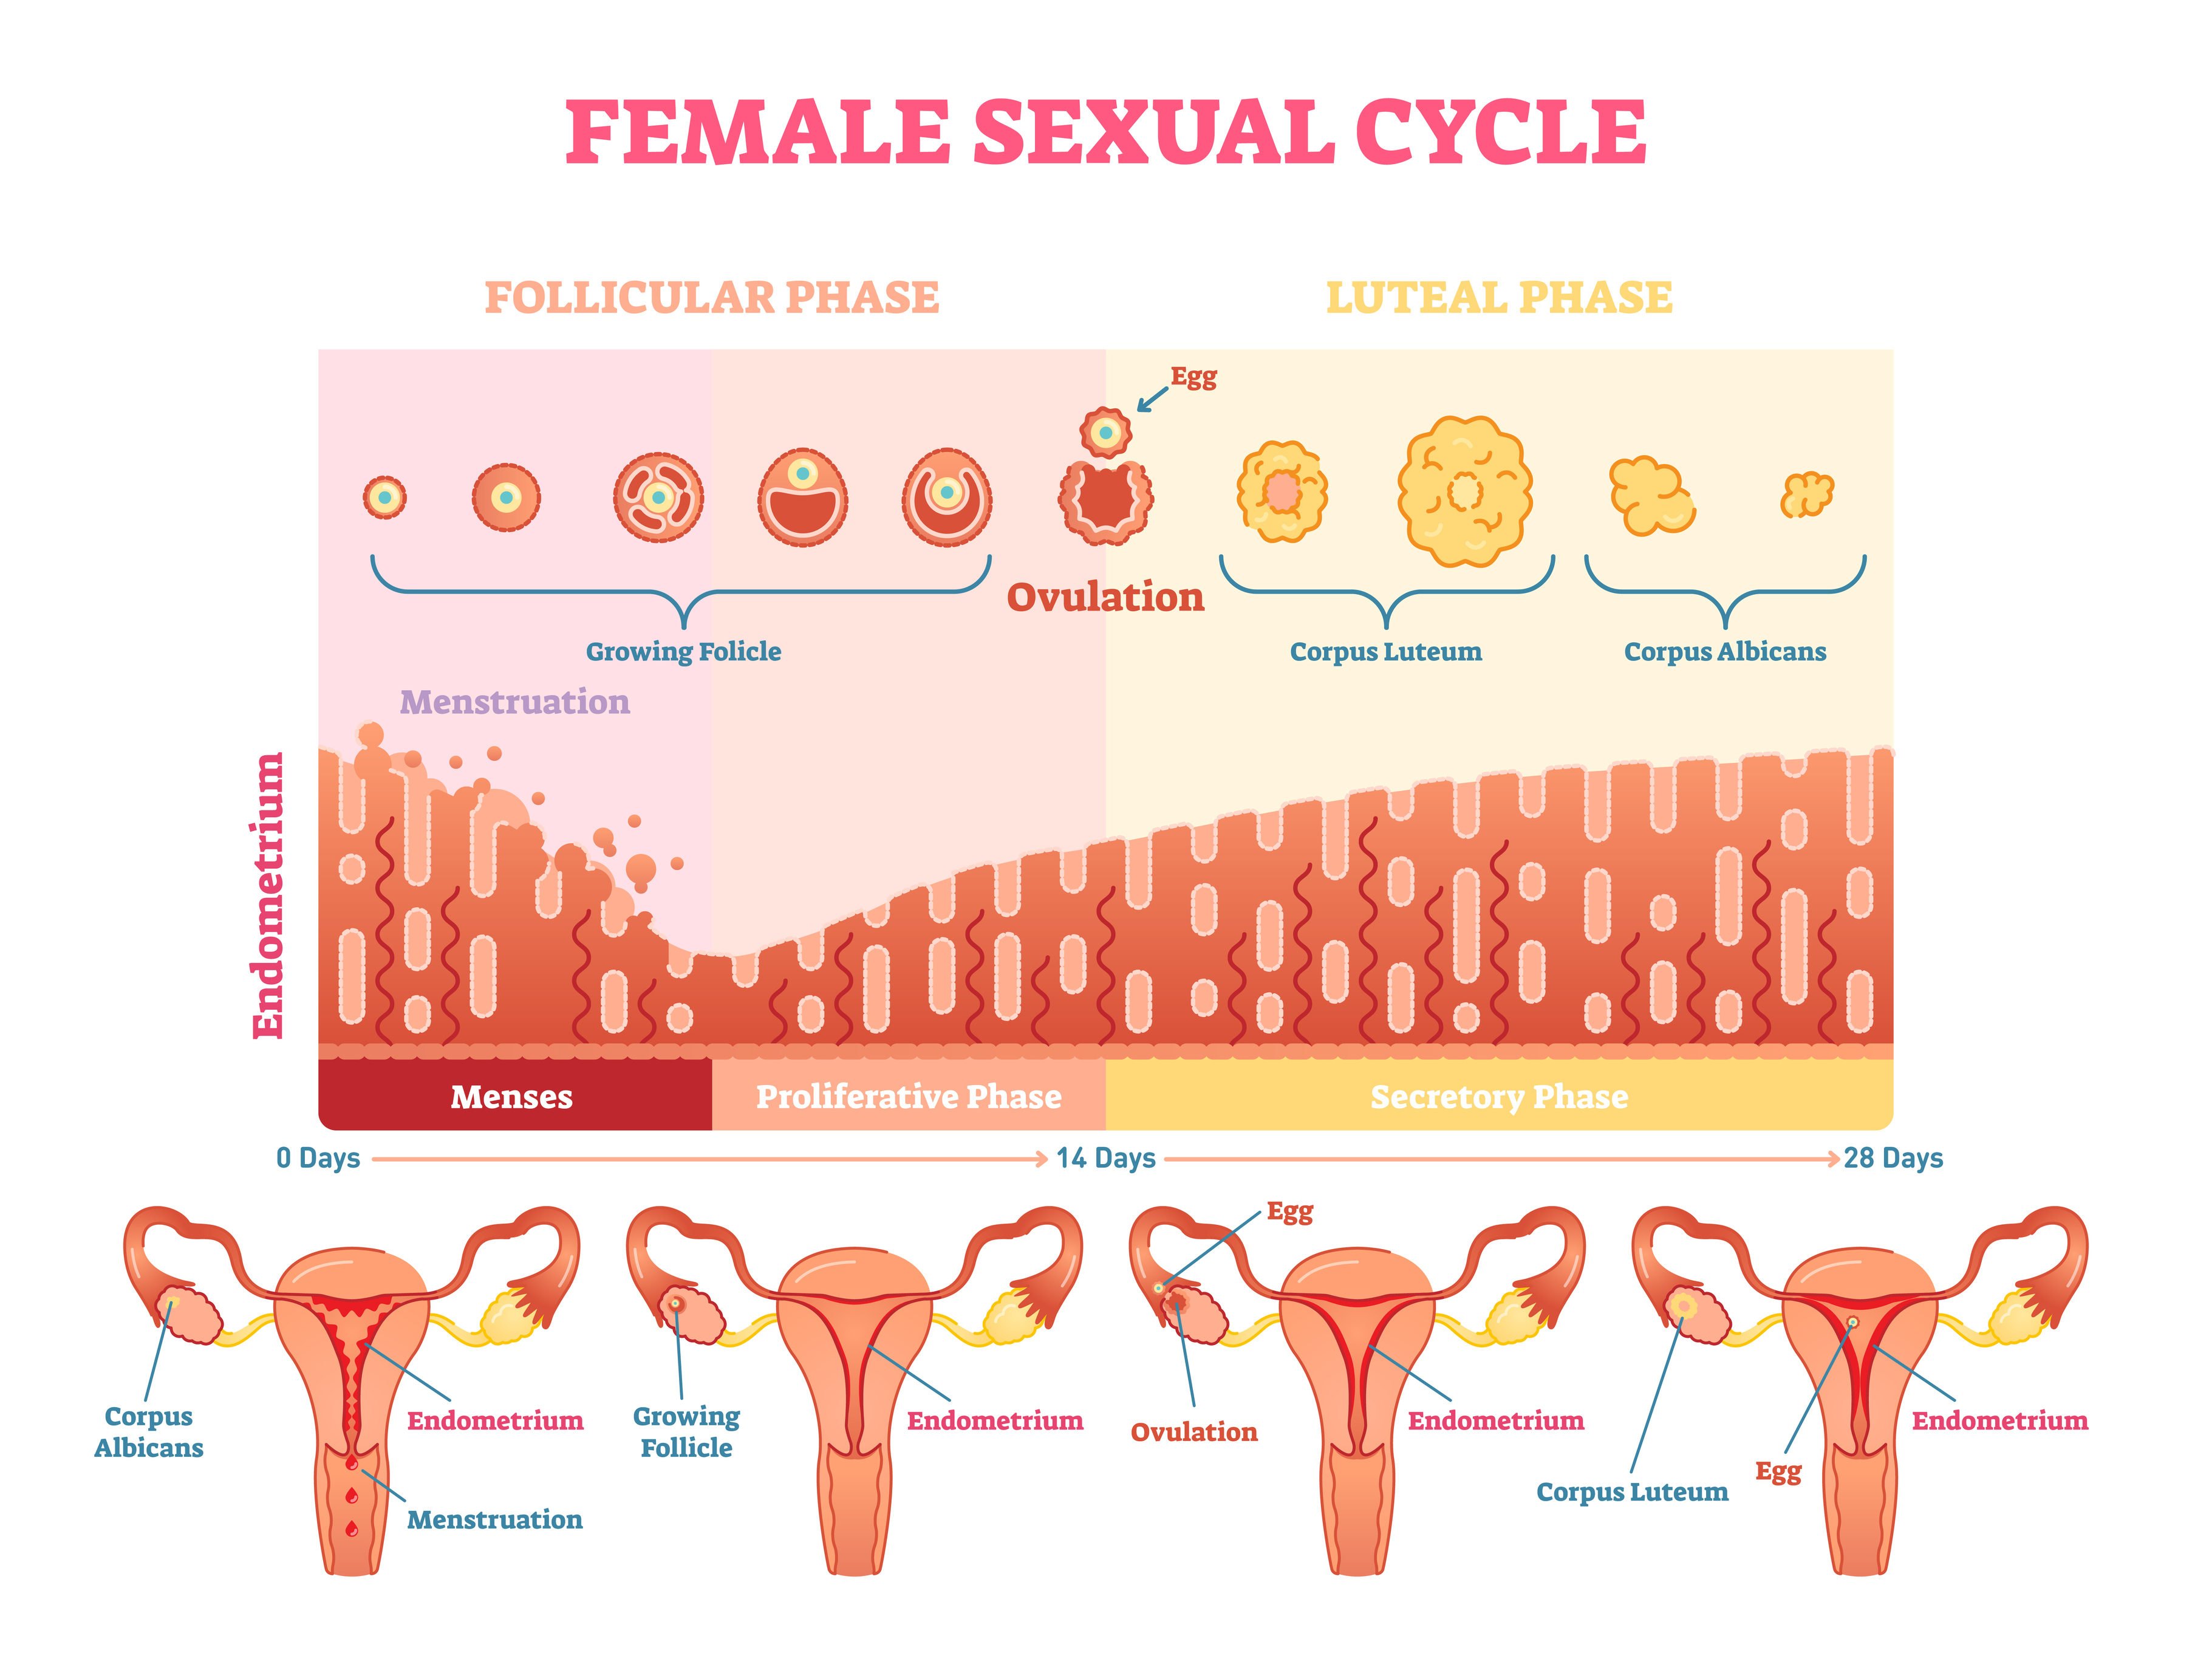 Female sexual cycle. Credit: normaals.